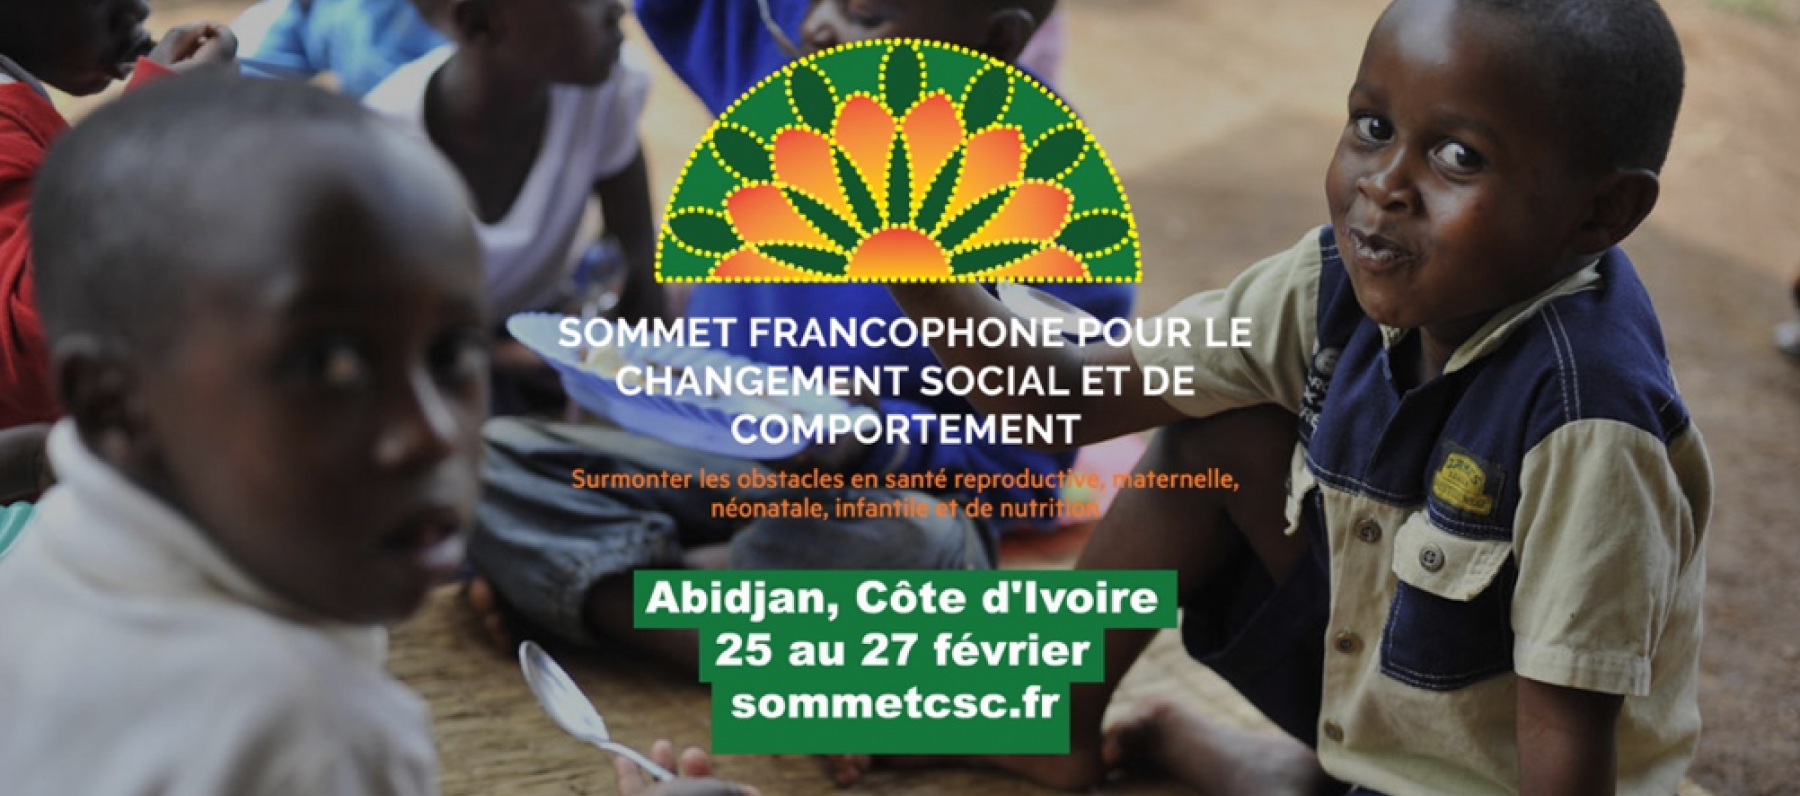 ThinkPlace at Francophone Social and Behaviour Conference 